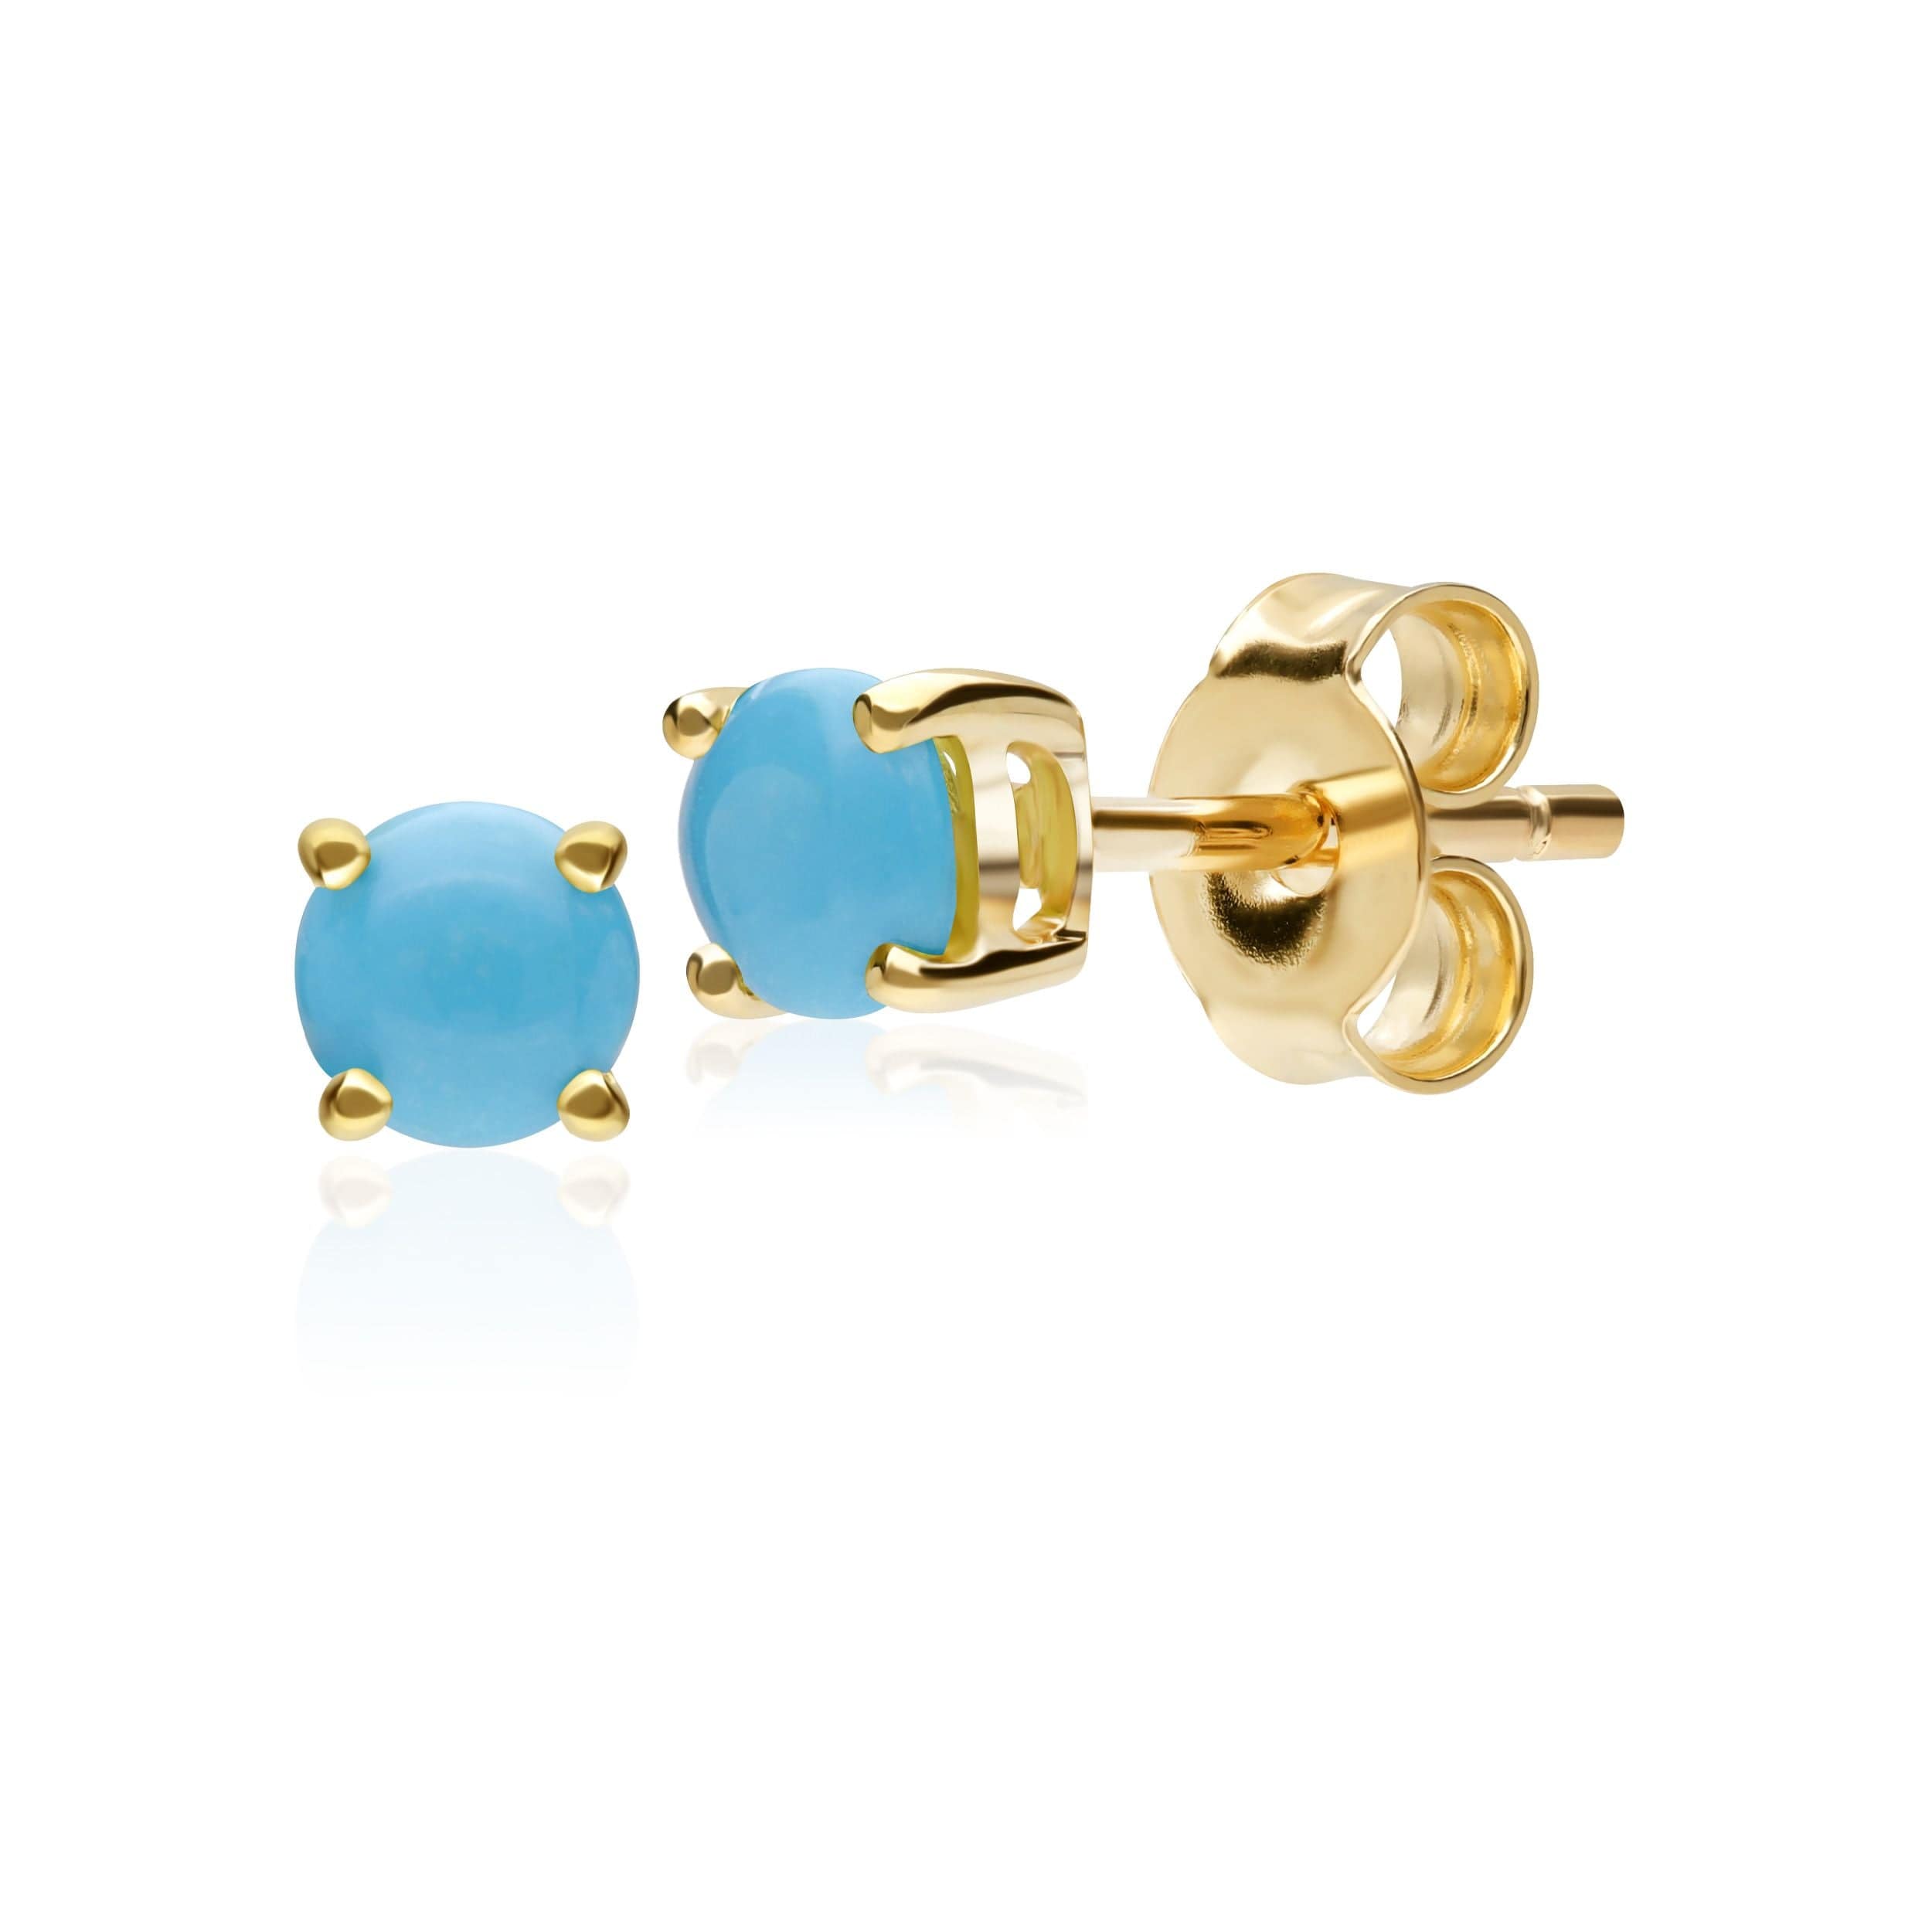 Classic Round Turquoise Cabochon Stud Earrings in 9ct Yellow Gold - Gemondo